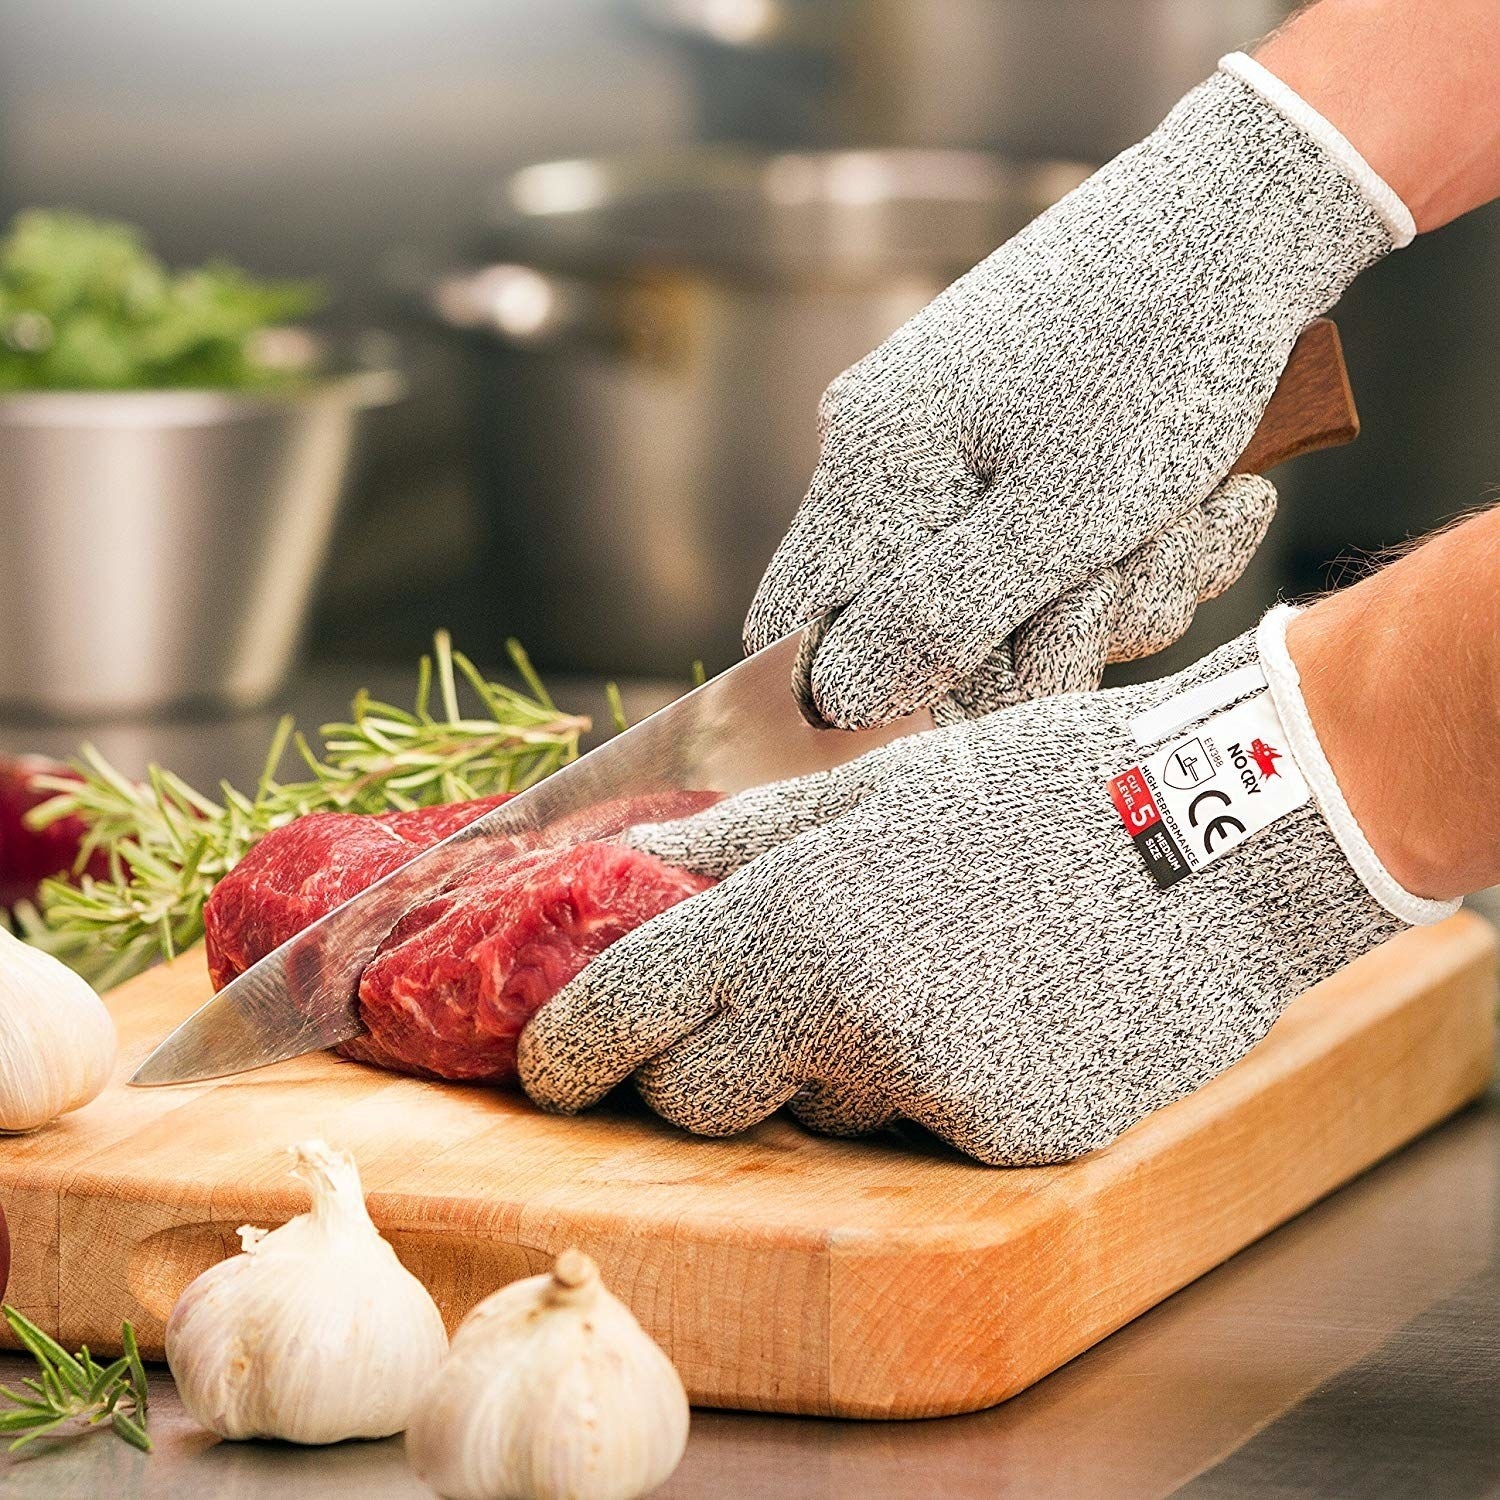 Model wearing gray and white gloves while cutting meat with a knife